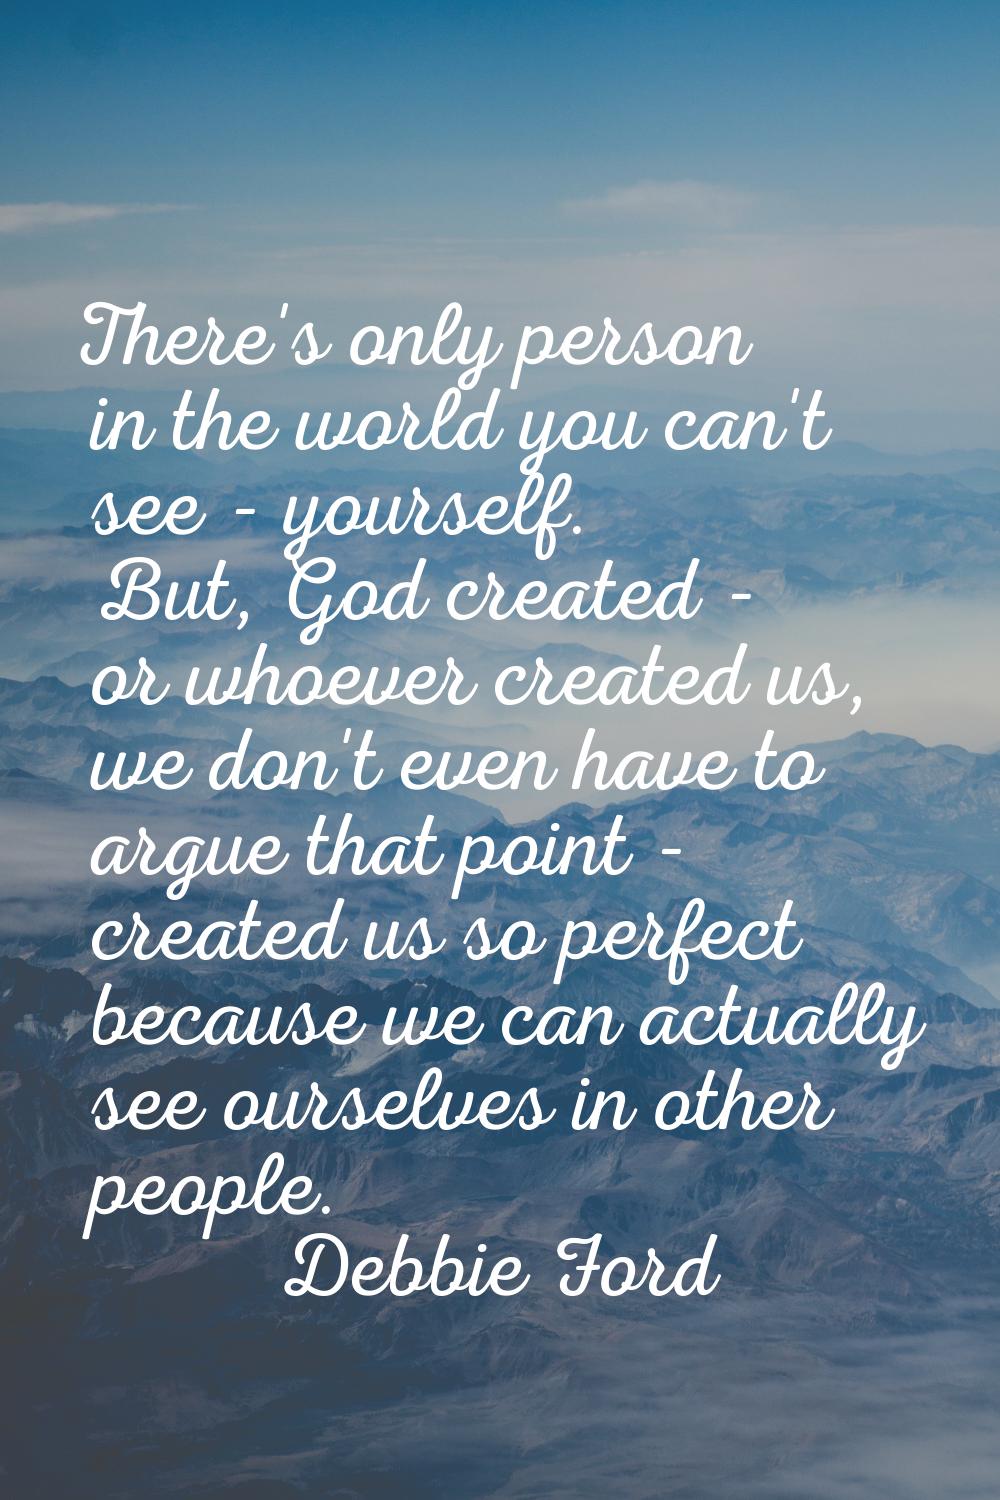 There's only person in the world you can't see - yourself. But, God created - or whoever created us